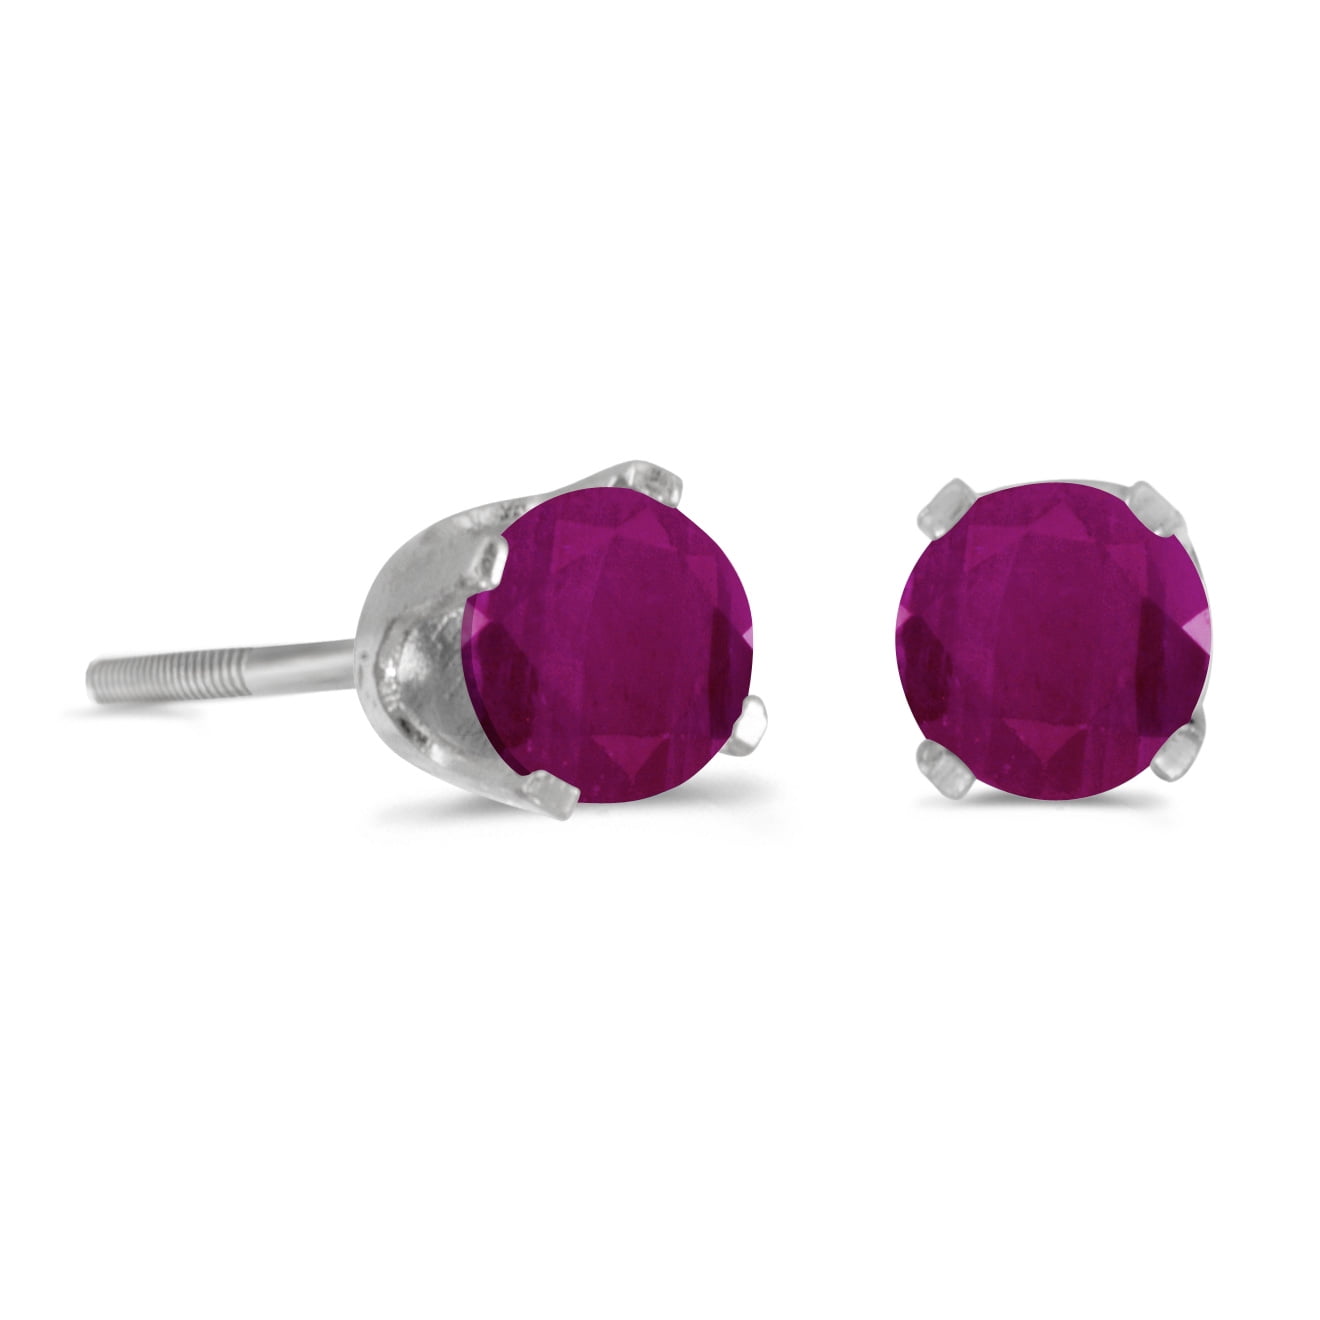 Details about   925 SOLID STERLING SILVER FACETED RUBY STUD EARRING O c778